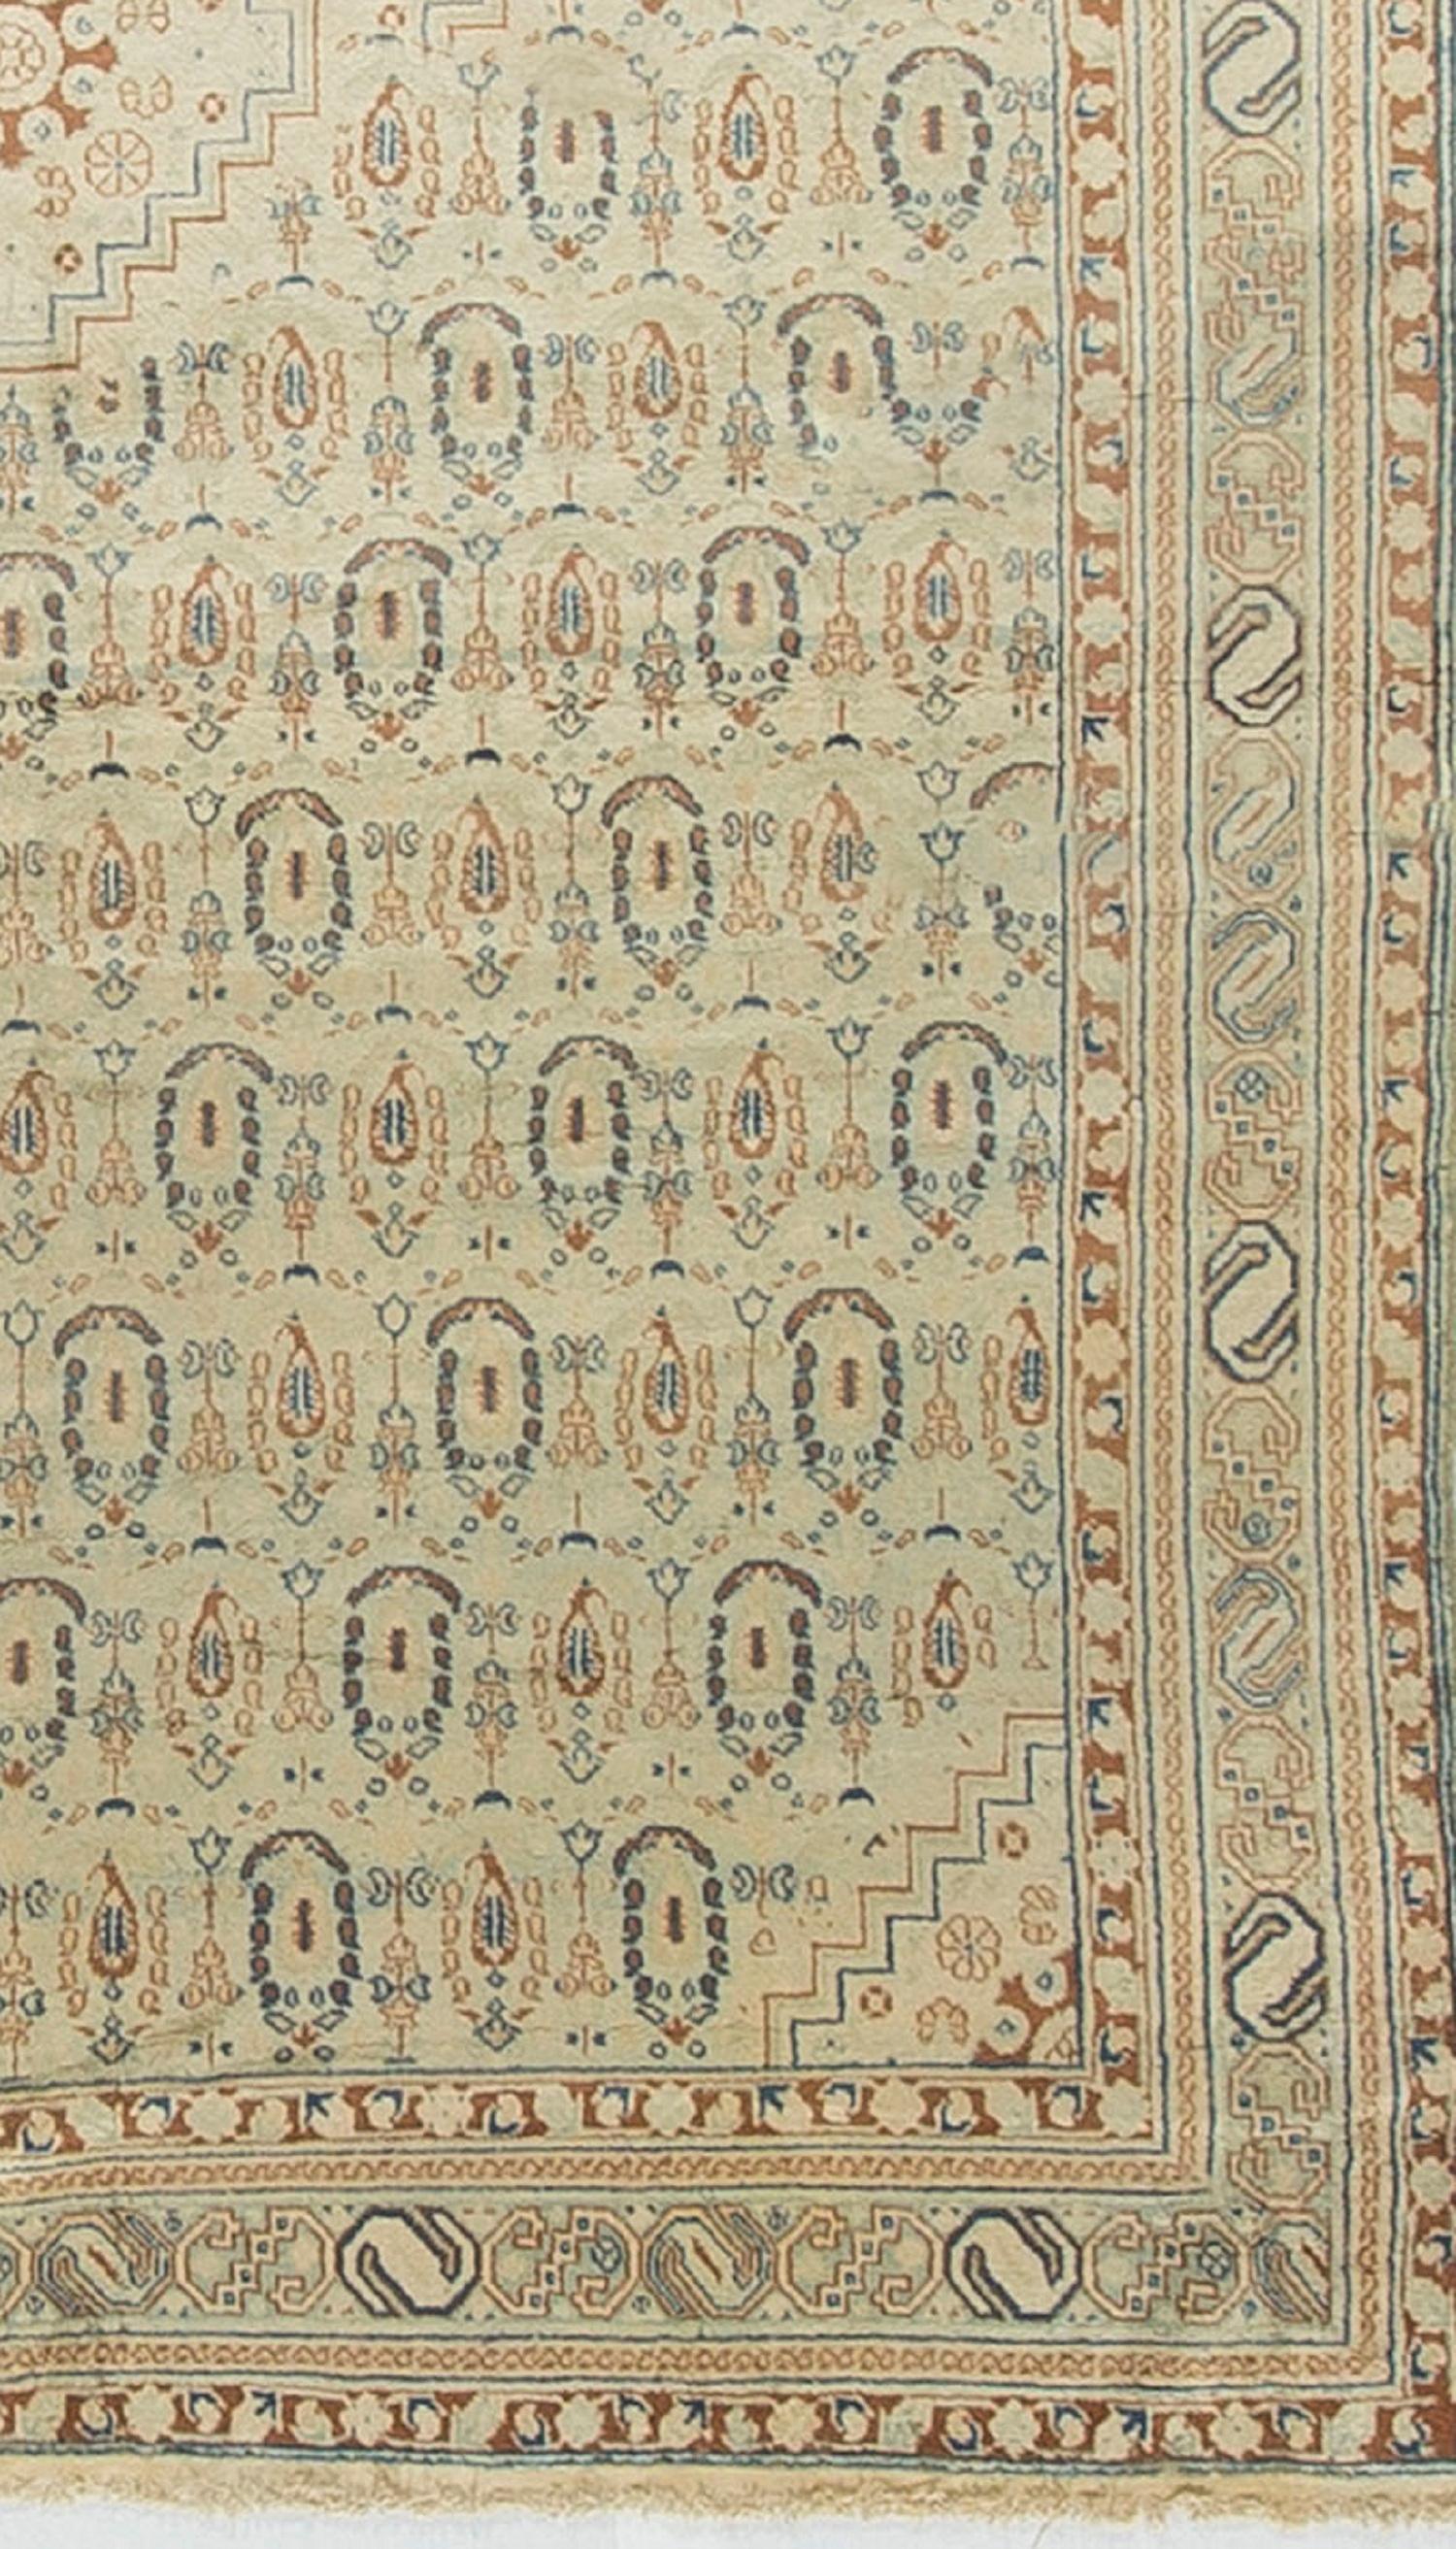 Indian Agra Rug Carpet Circa 1900. An antique handwoven Agra carpet, circa 1900. The main field filled with botheh's surrounding a central spinning wheel design. The lightness of the rug makes it able to work in all styles of design from classic